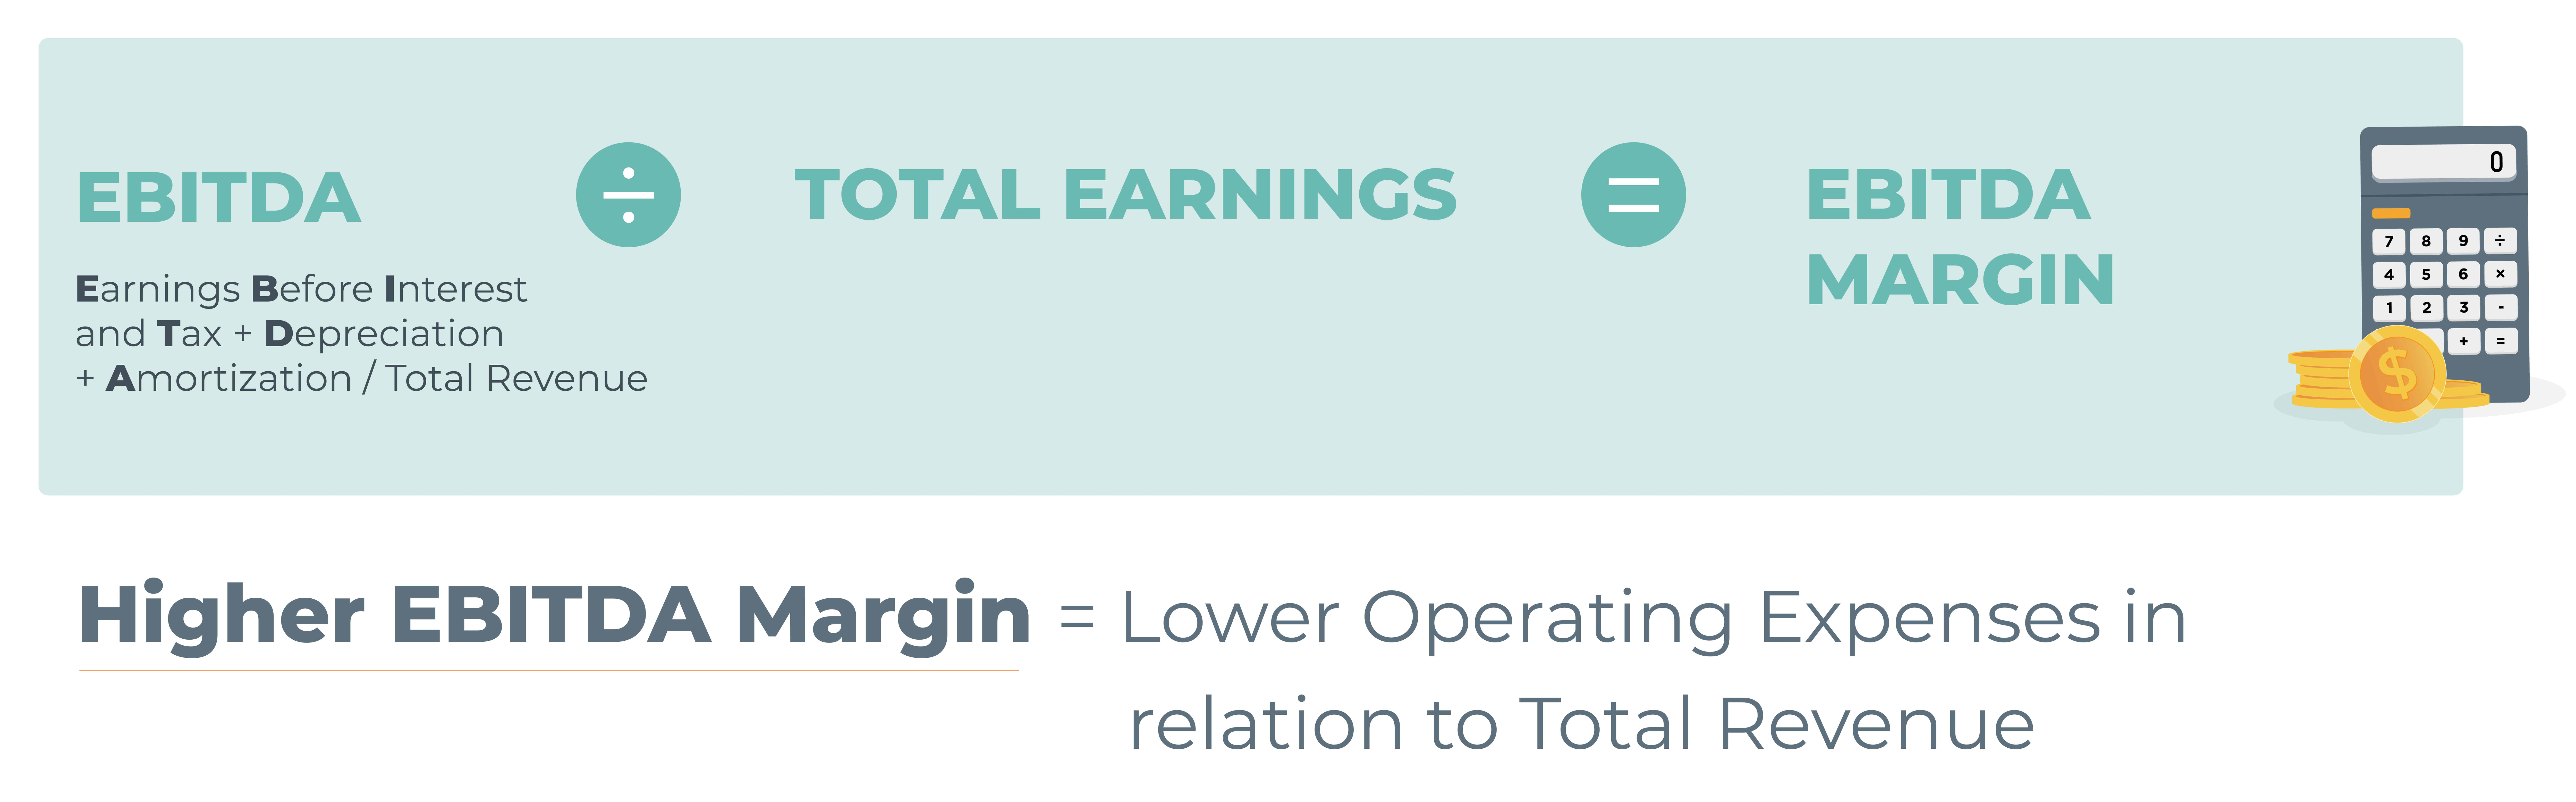 EBITDA margin (earnings before interest, taxes, depreciation, and amortization / total earnings)